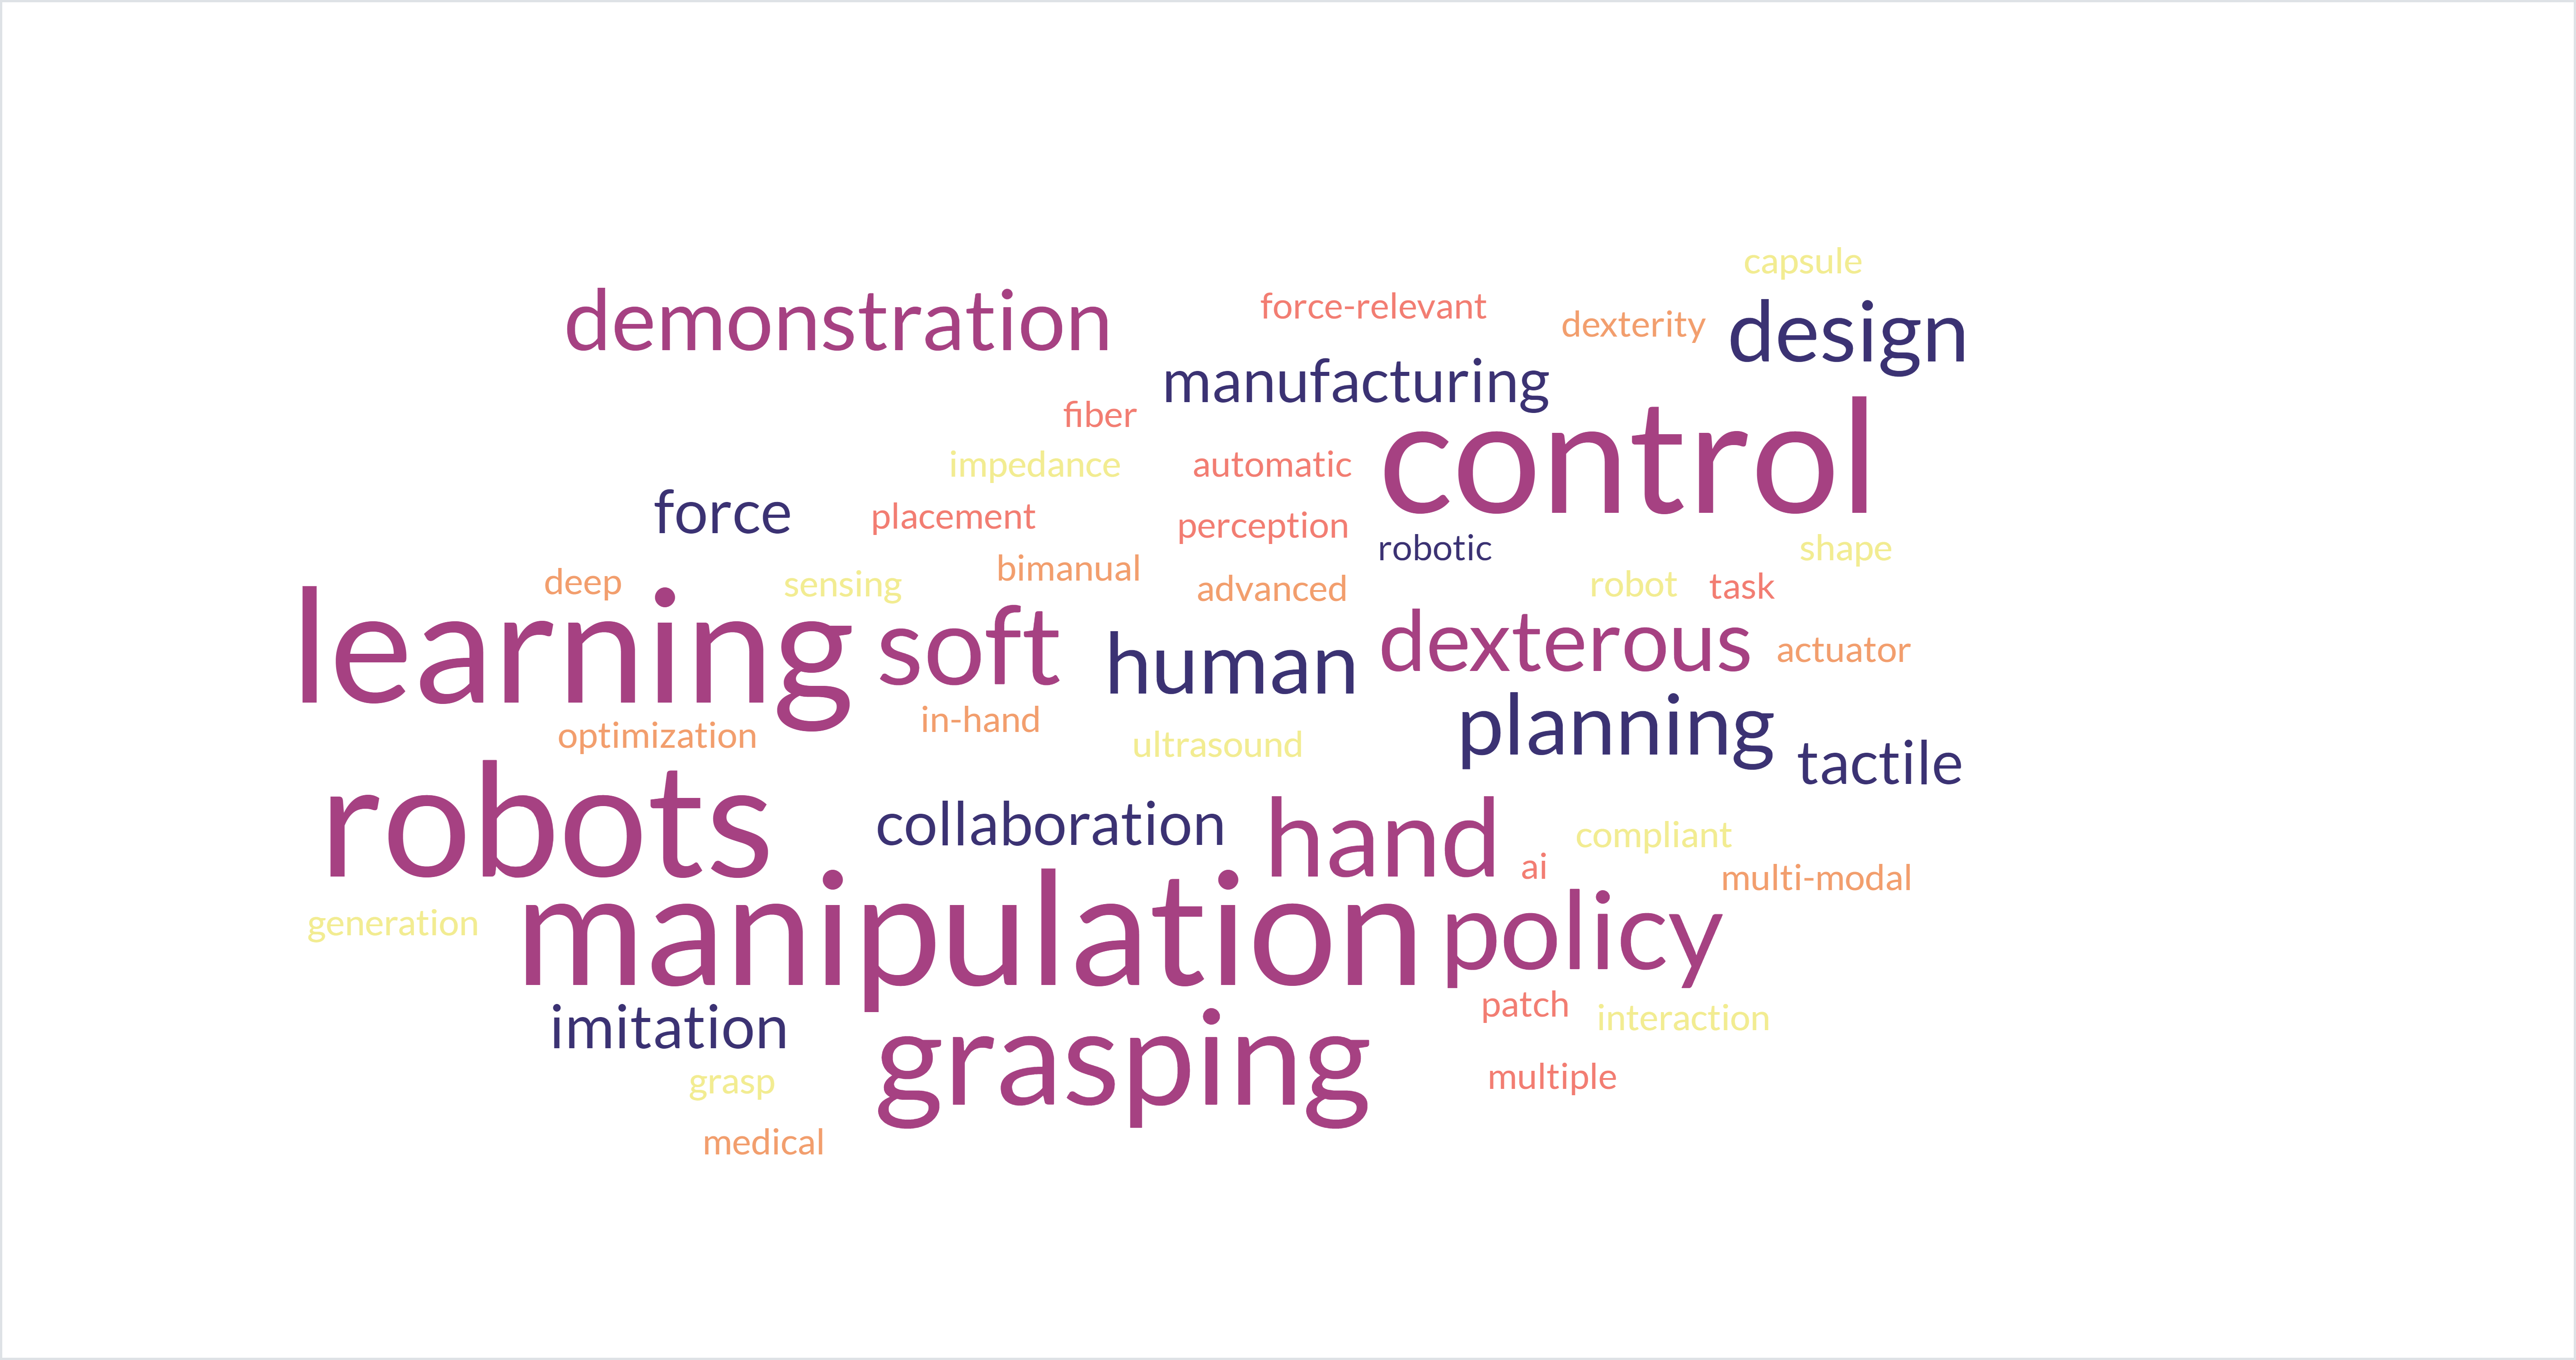 This is word cloud of research in my group.